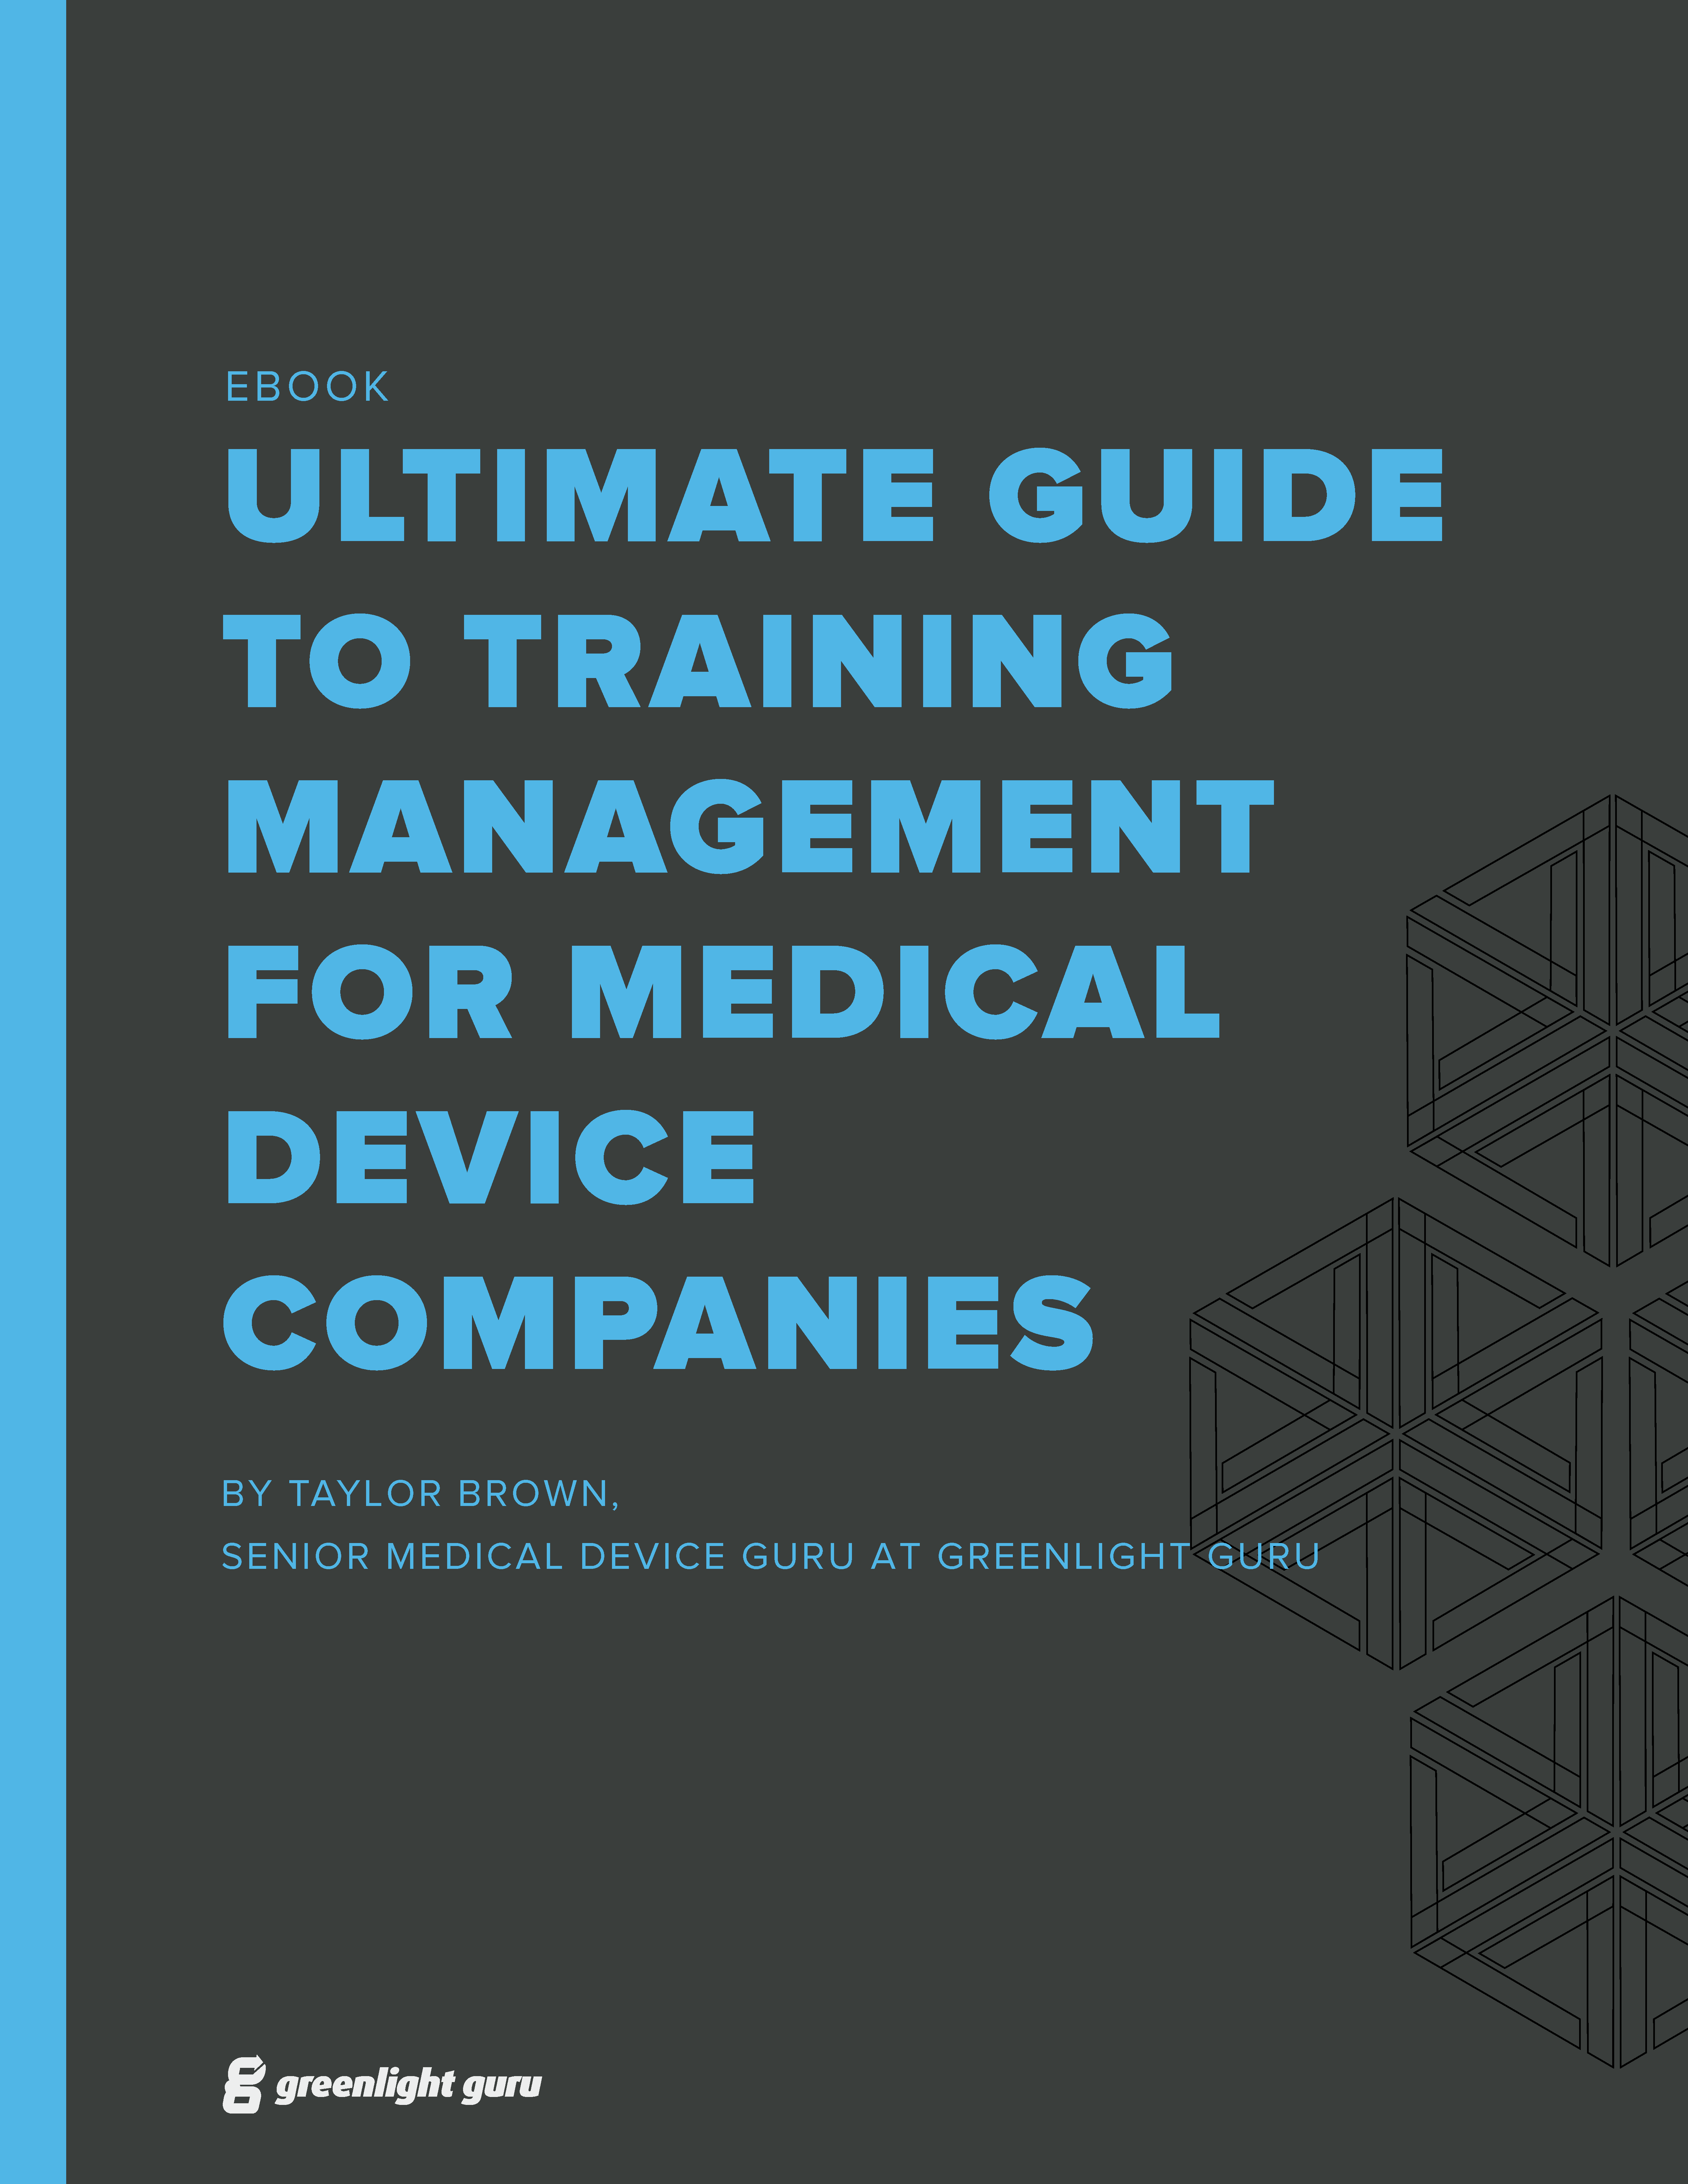 (cover) Ultimate Guide to Training Management for Medical Device Companies